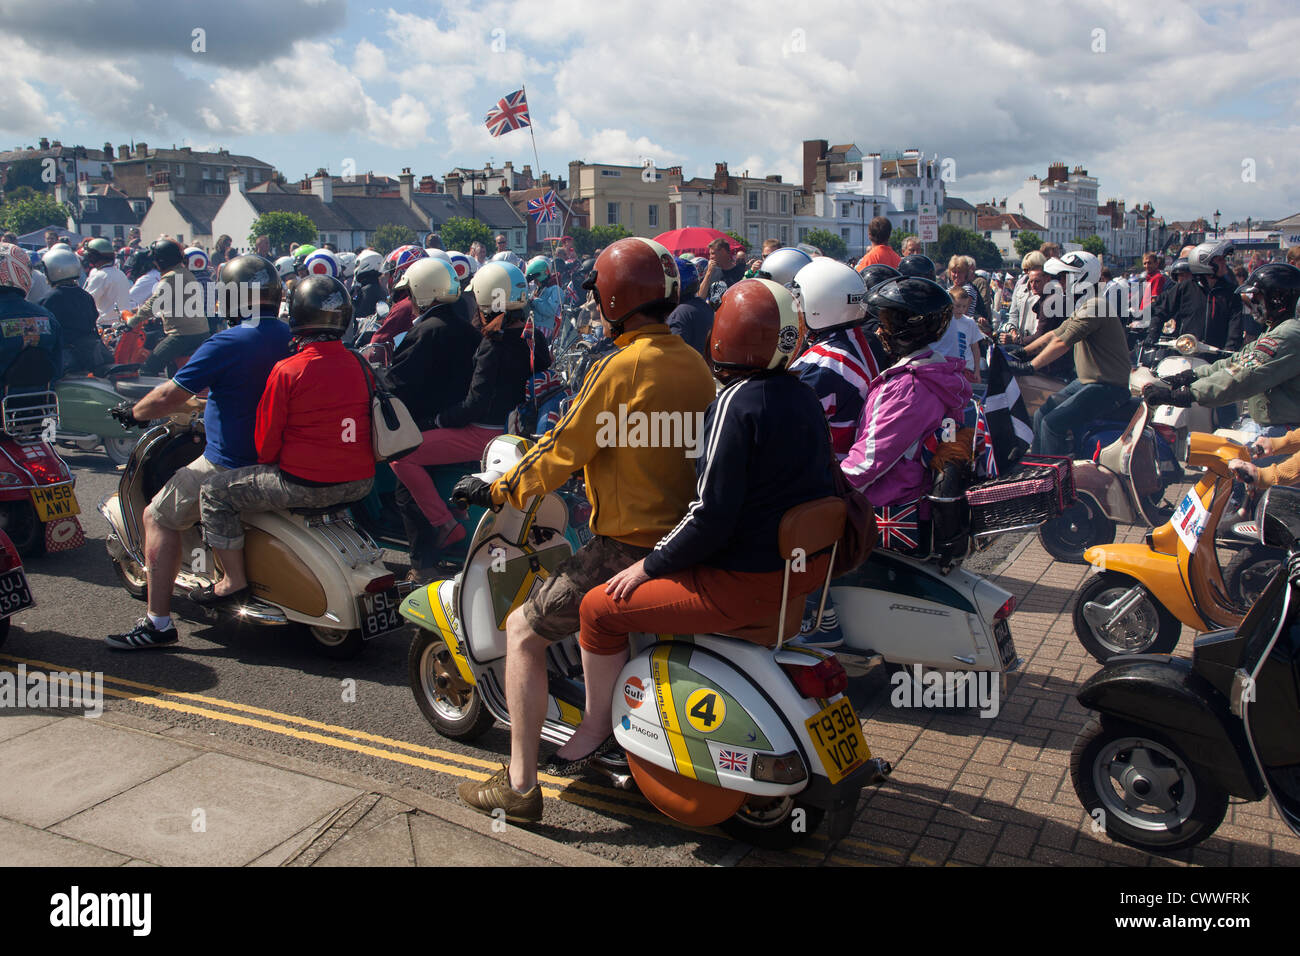 La balade en scooter International Rally Isle of Wight Banque D'Images